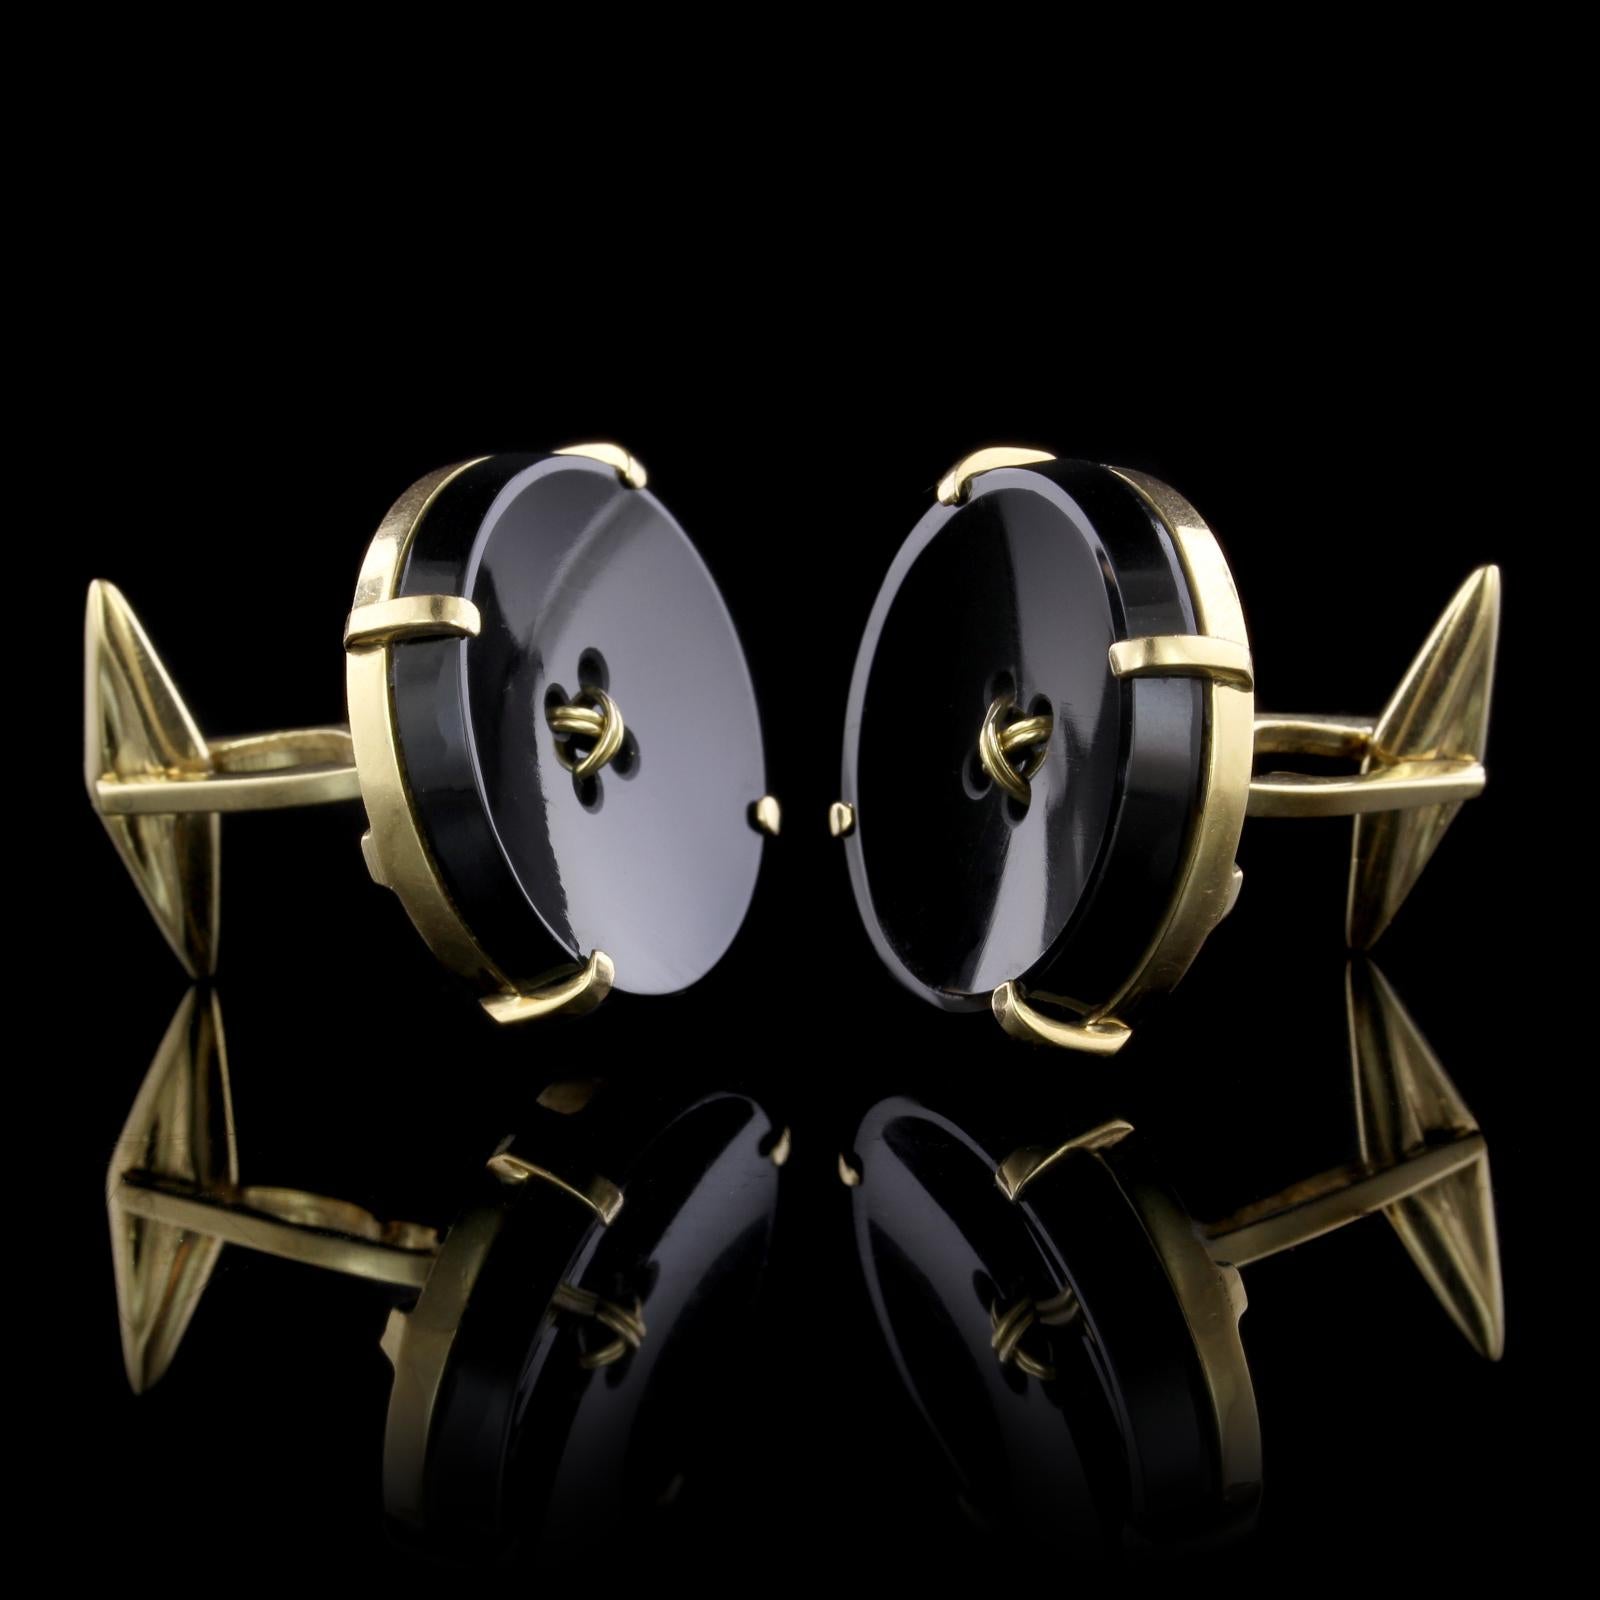 18K Yellow Gold Onyx Button Cufflinks, Italy. Each onyx button measures 22.00mm.